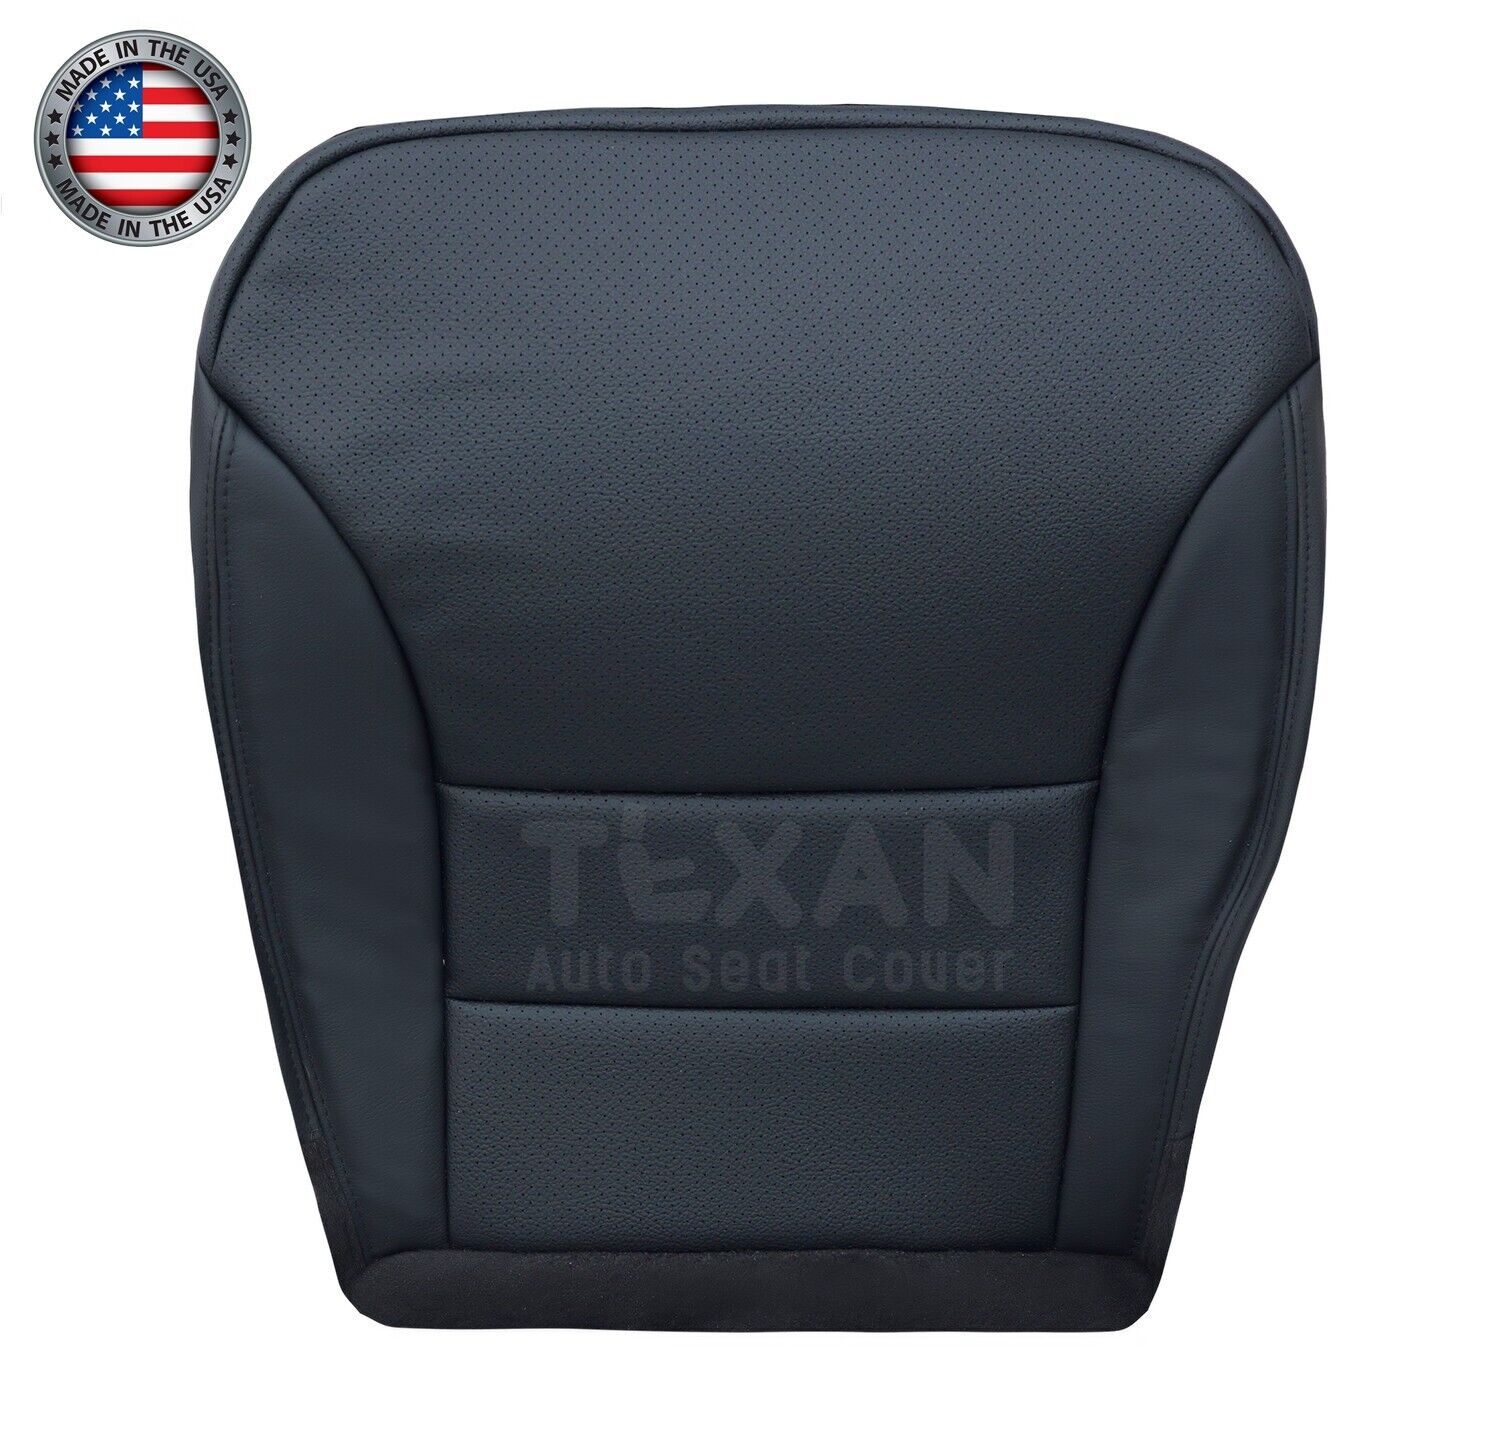 Fits 2005, 2006, 2007 Honda CRV Passenger Side Bottom Leather Perforated Replacement Seat Cover Black